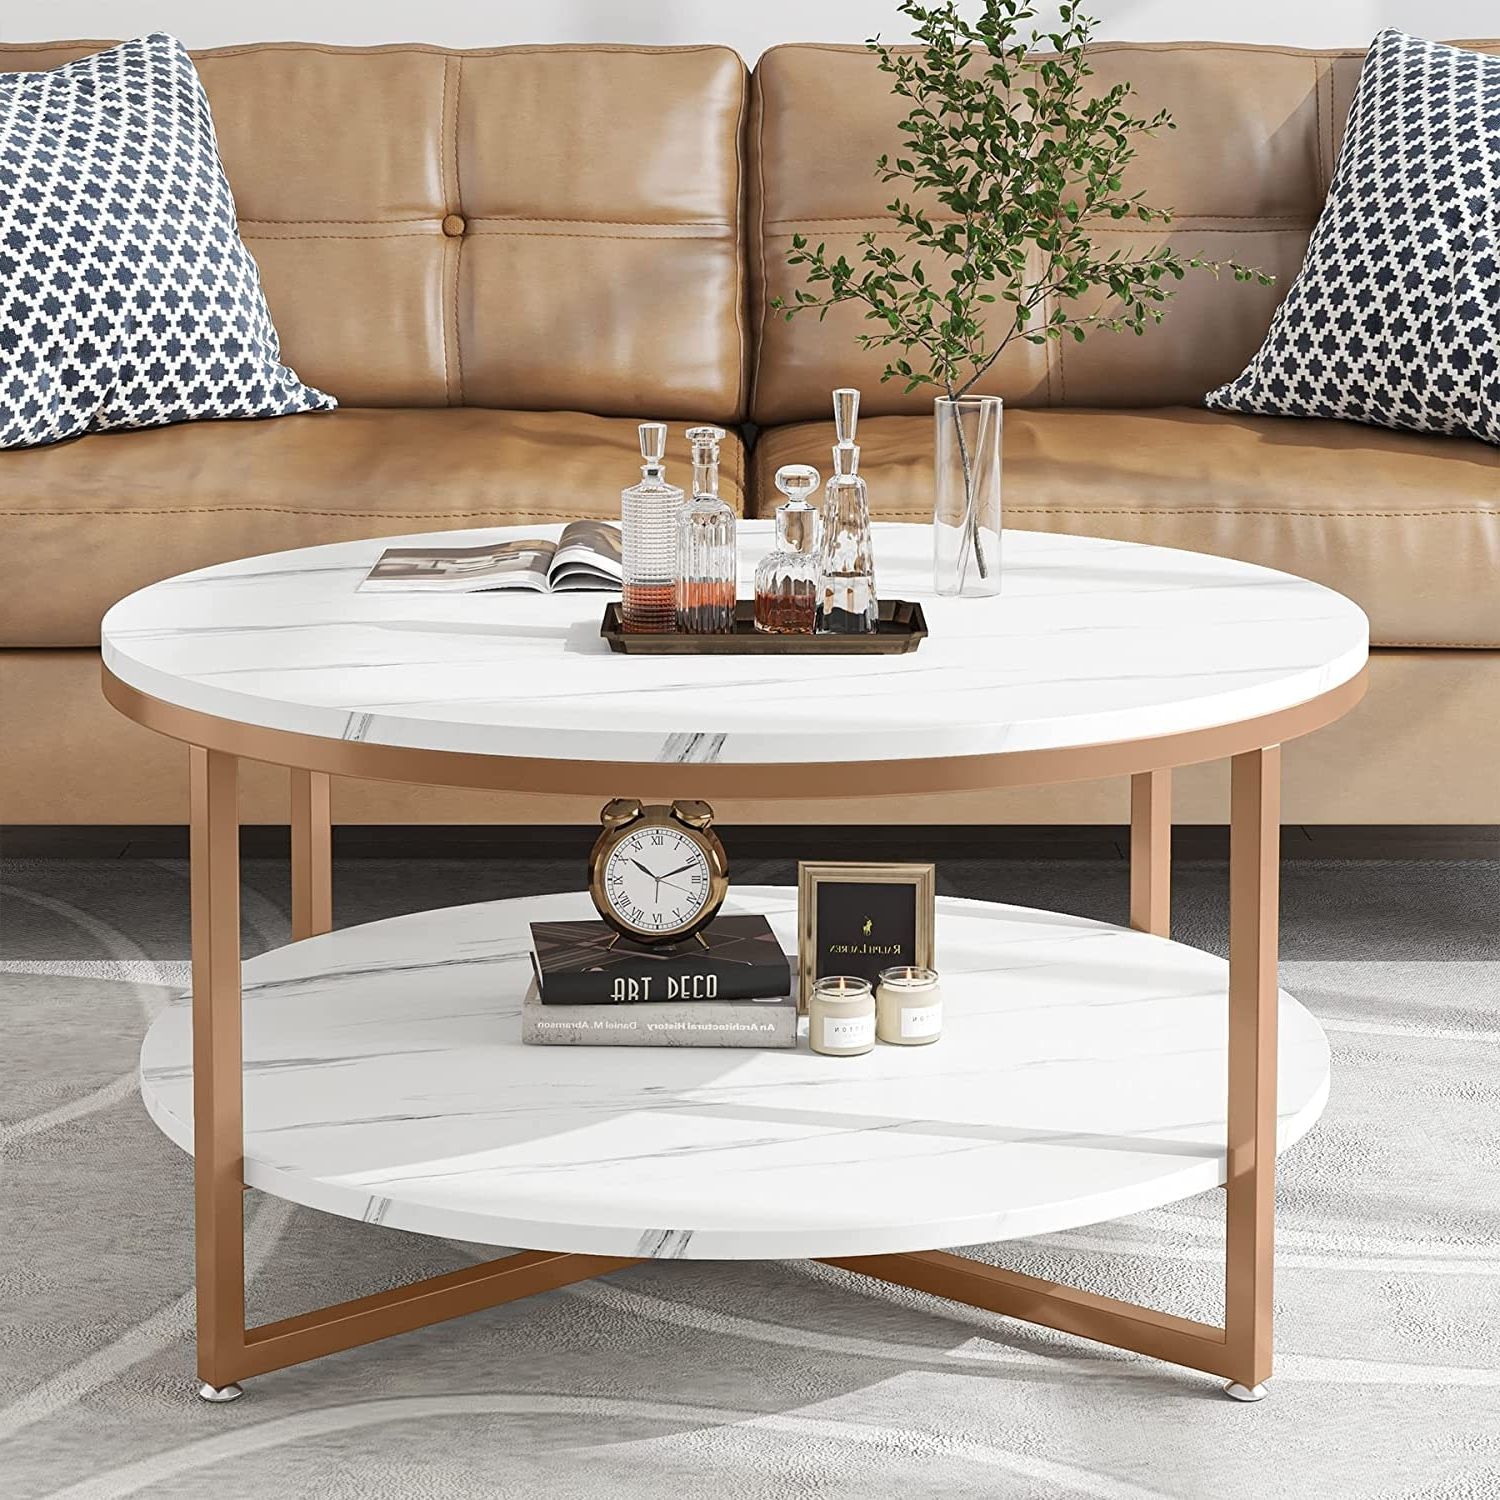 Most Popular Two Tier Round Faux Marble Modern Coffee Table With Metal Legs And Open  Storage Shelf For Living Room, White Gold – Bed Bath & Beyond – 37593828 Regarding Coffee Tables With Open Storage Shelves (Photo 8 of 10)